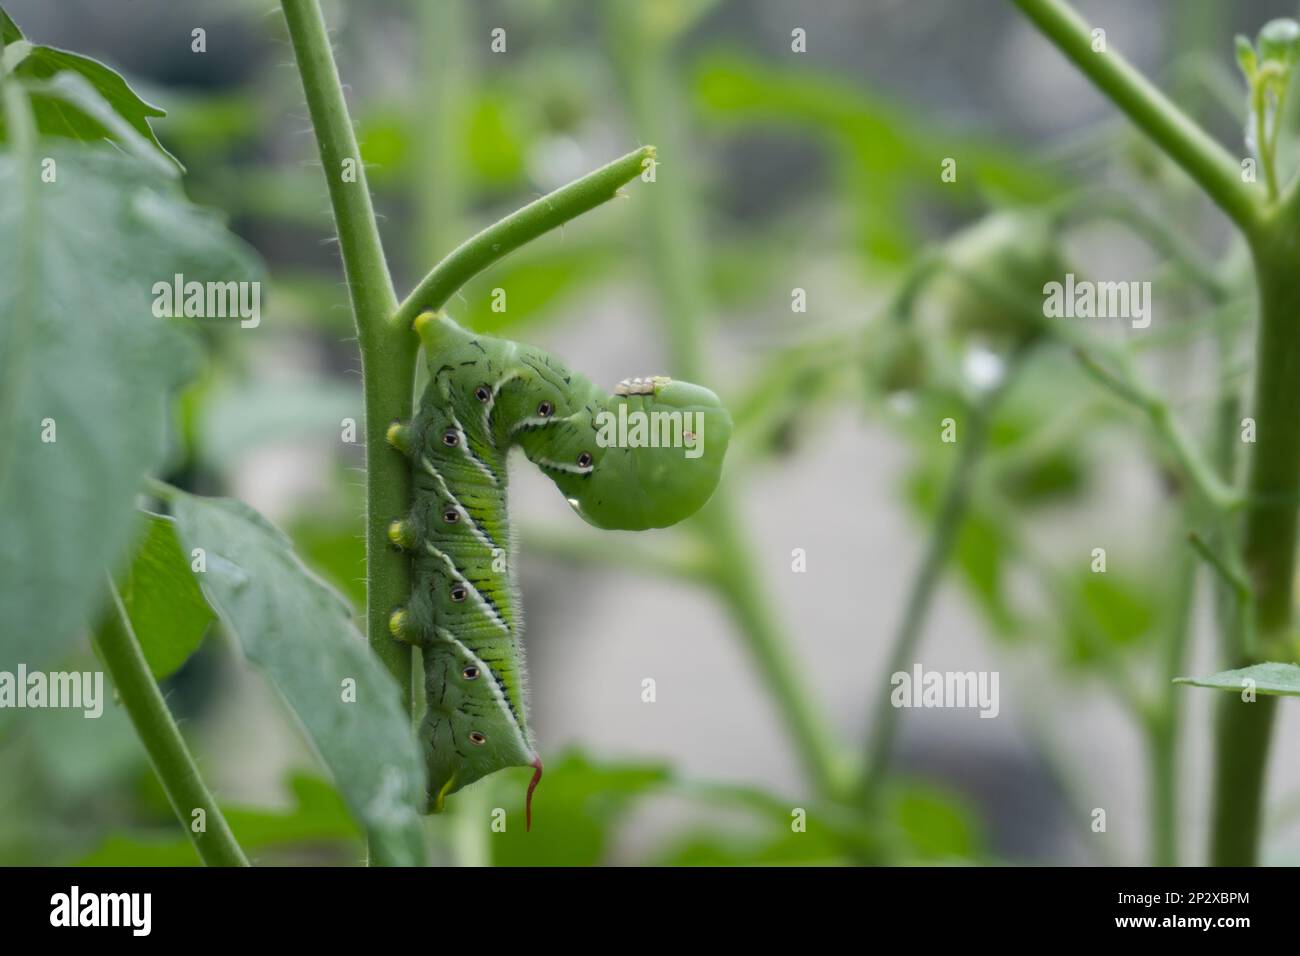 Close-up image of a tobacco hornworm on the stem of a tomato plant in a home garden in summer; pest Stock Photo